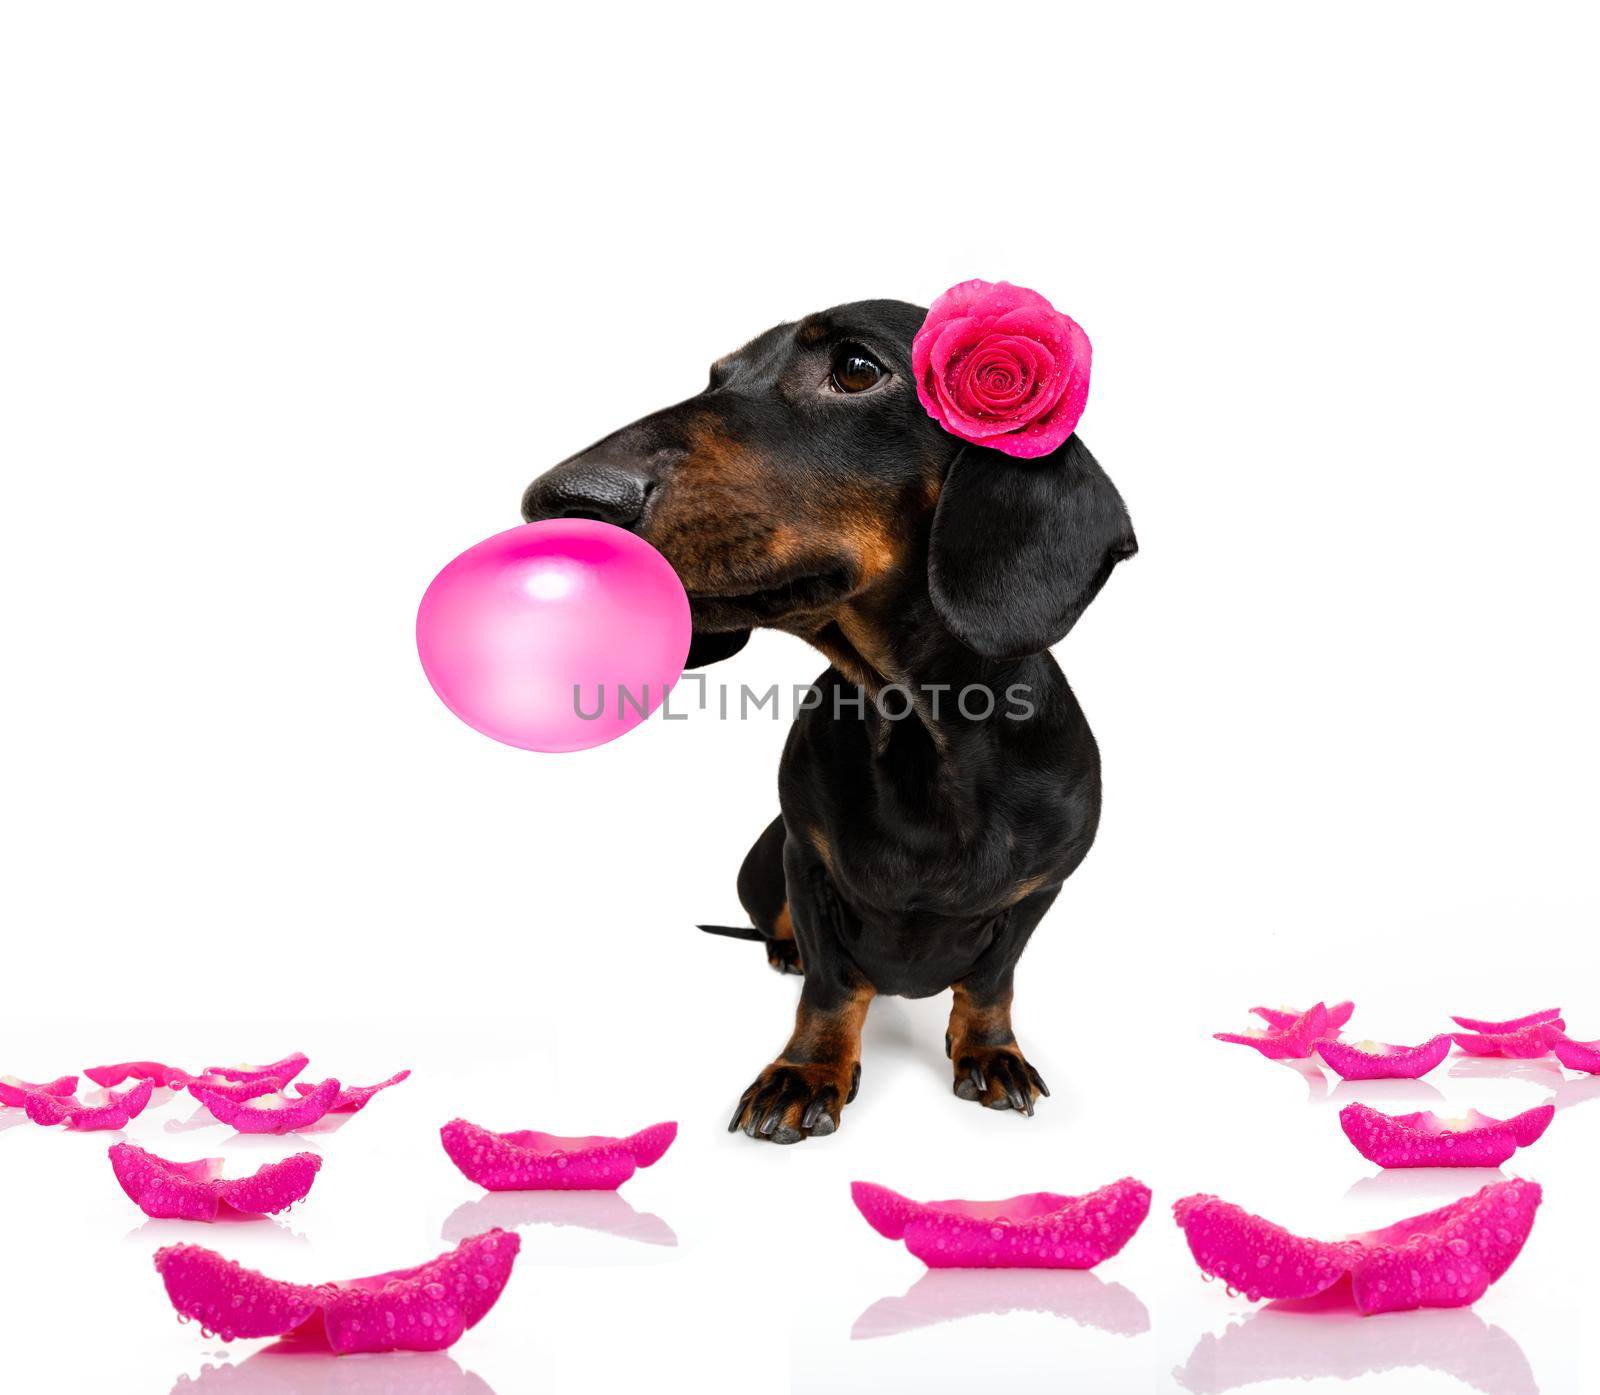 sausage dachshund dog , with a valentines rose on head and on floor with bubble chewing gum, isolated on white background